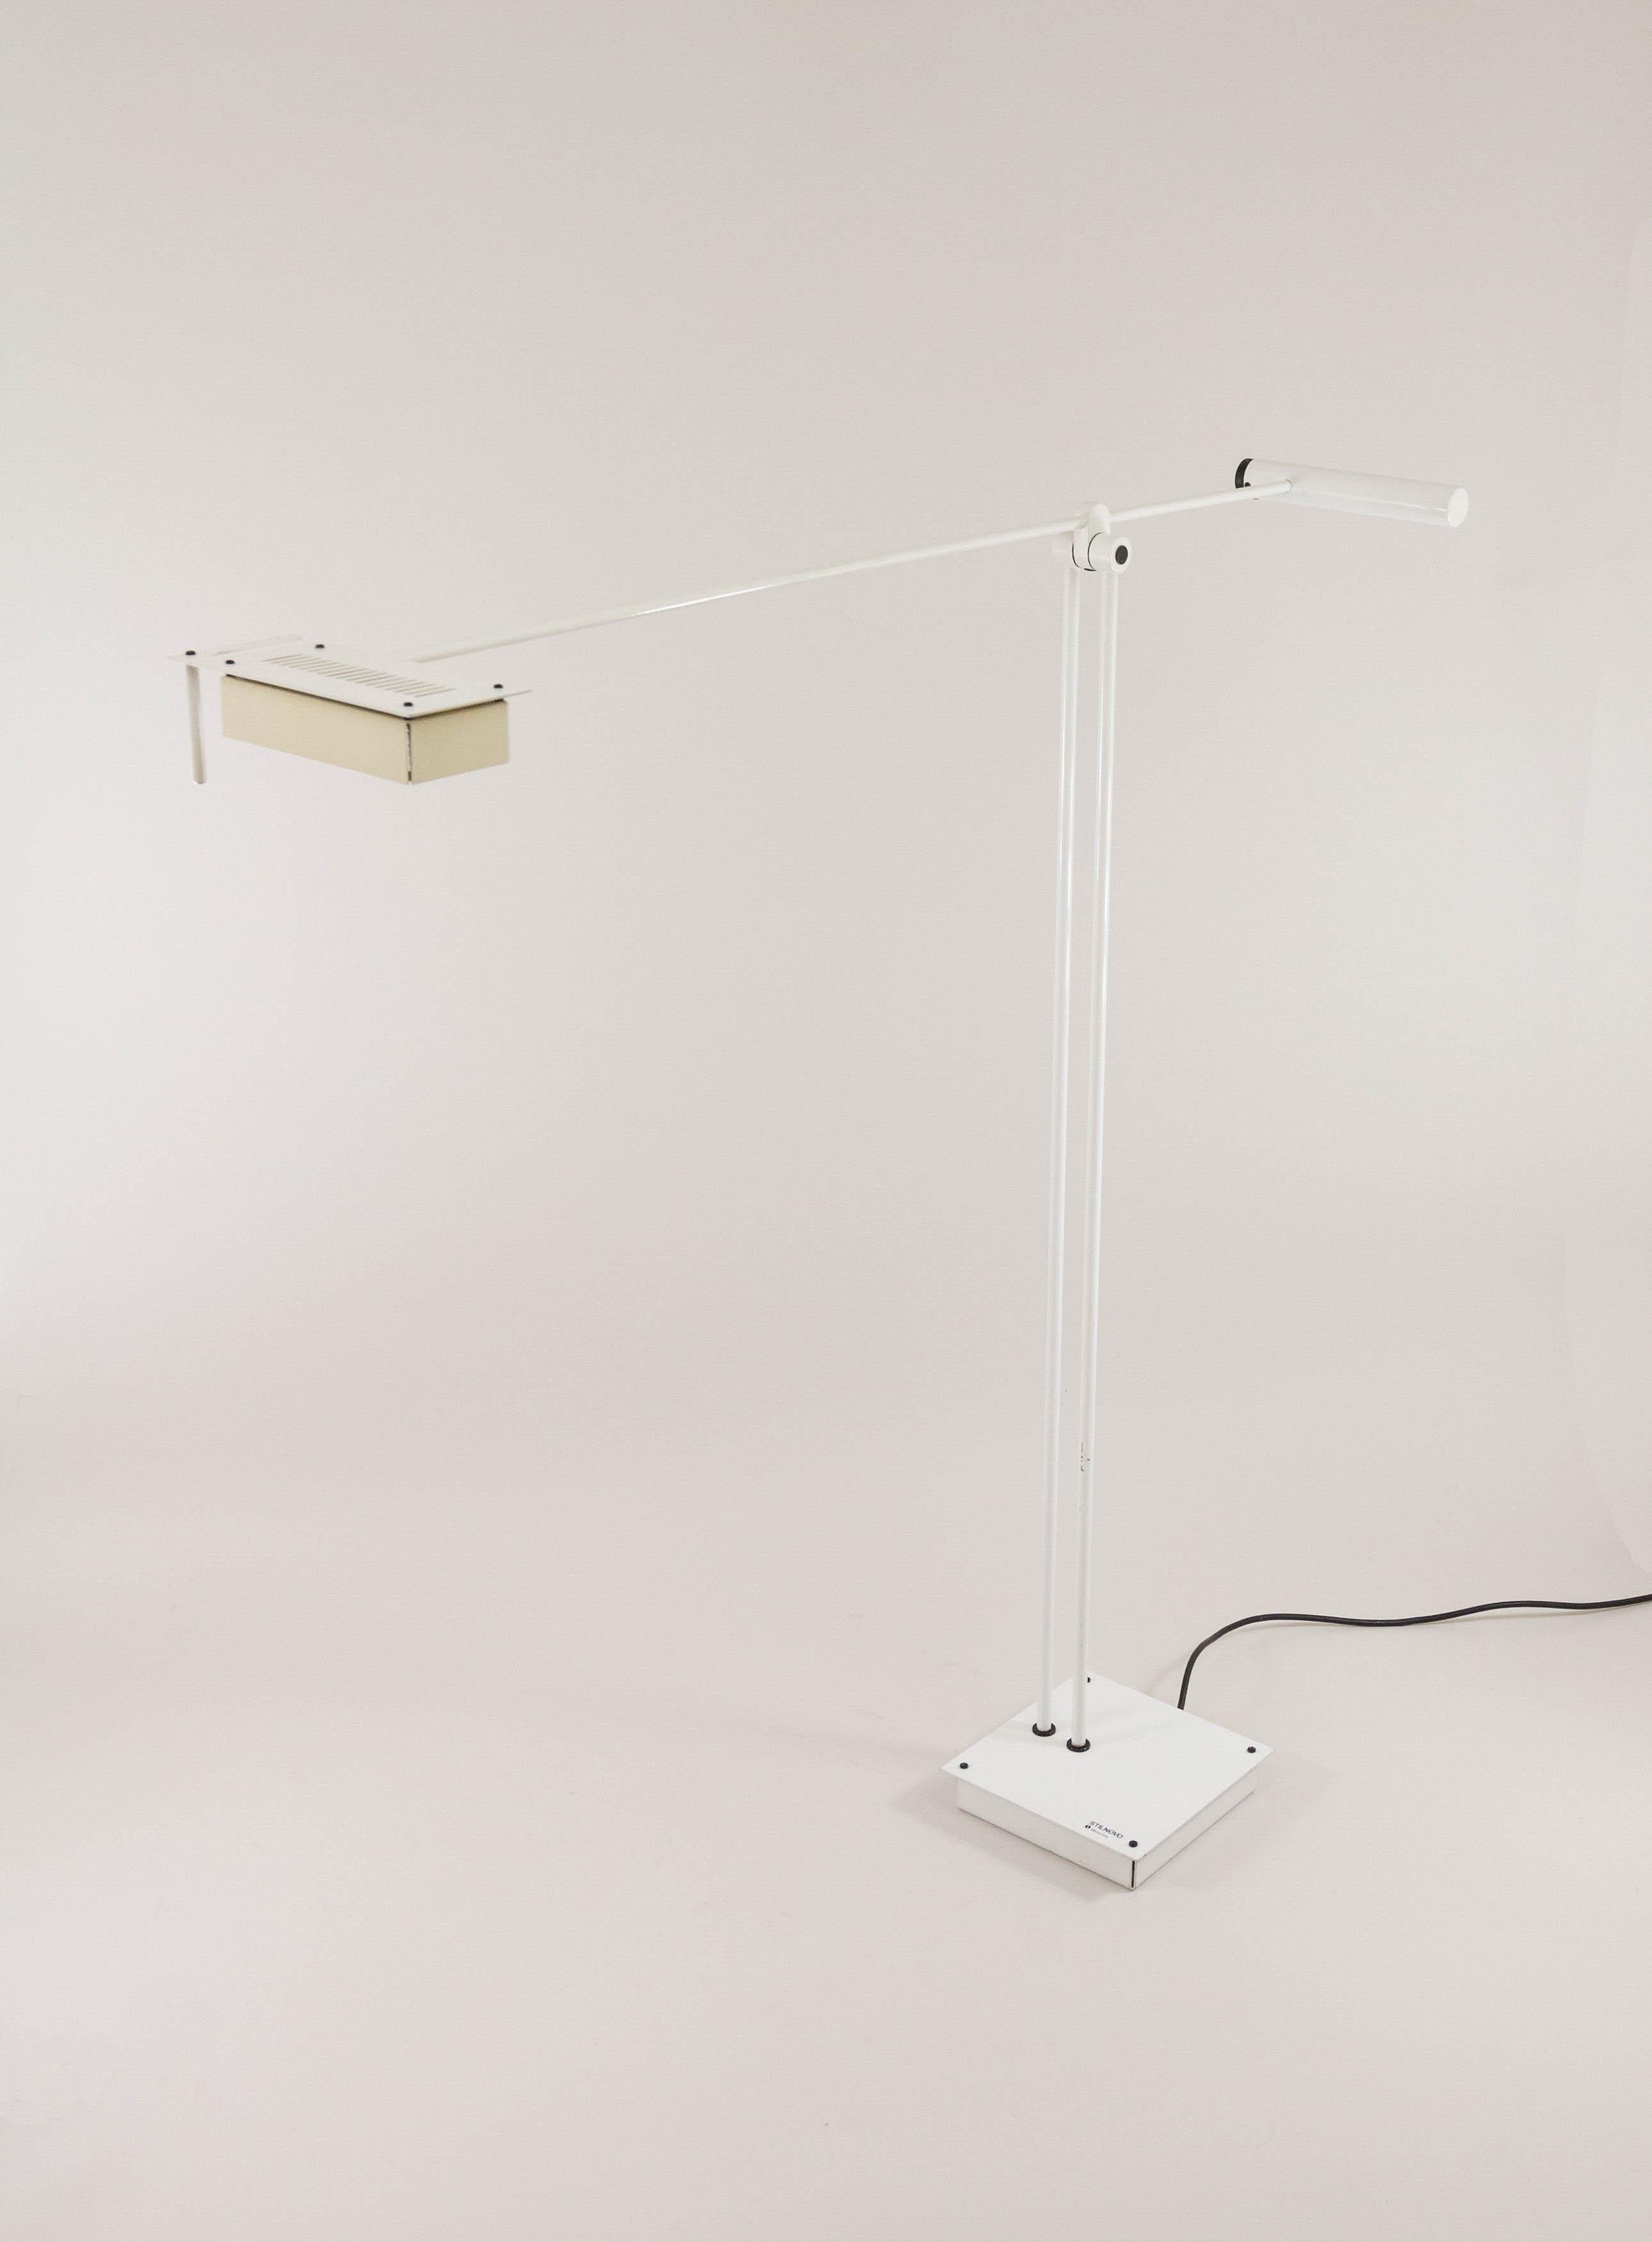 White Samurai is an impressive floor lamp by Japanese designer Shigeaki Asahara for Italian lighting manufacturer Stilnovo. The height of this halogen floor lamp is adjustable with a maximum height of 2 meters. The dimmer is subtly incorporated in